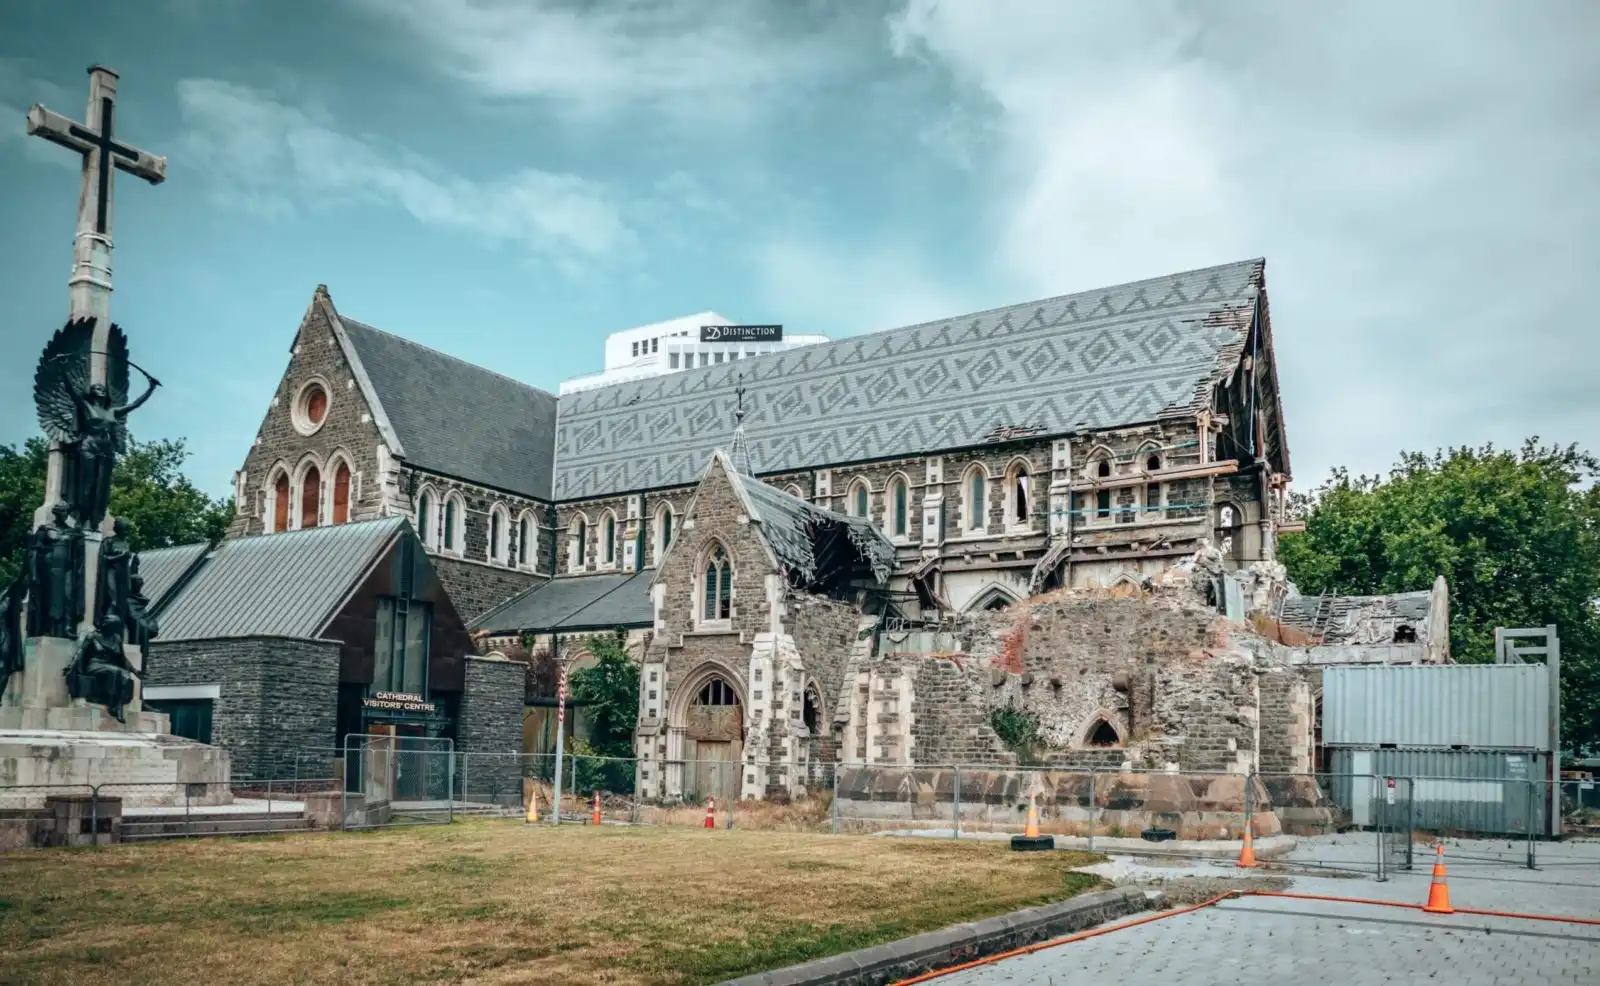 The old Christchurch Cathedral